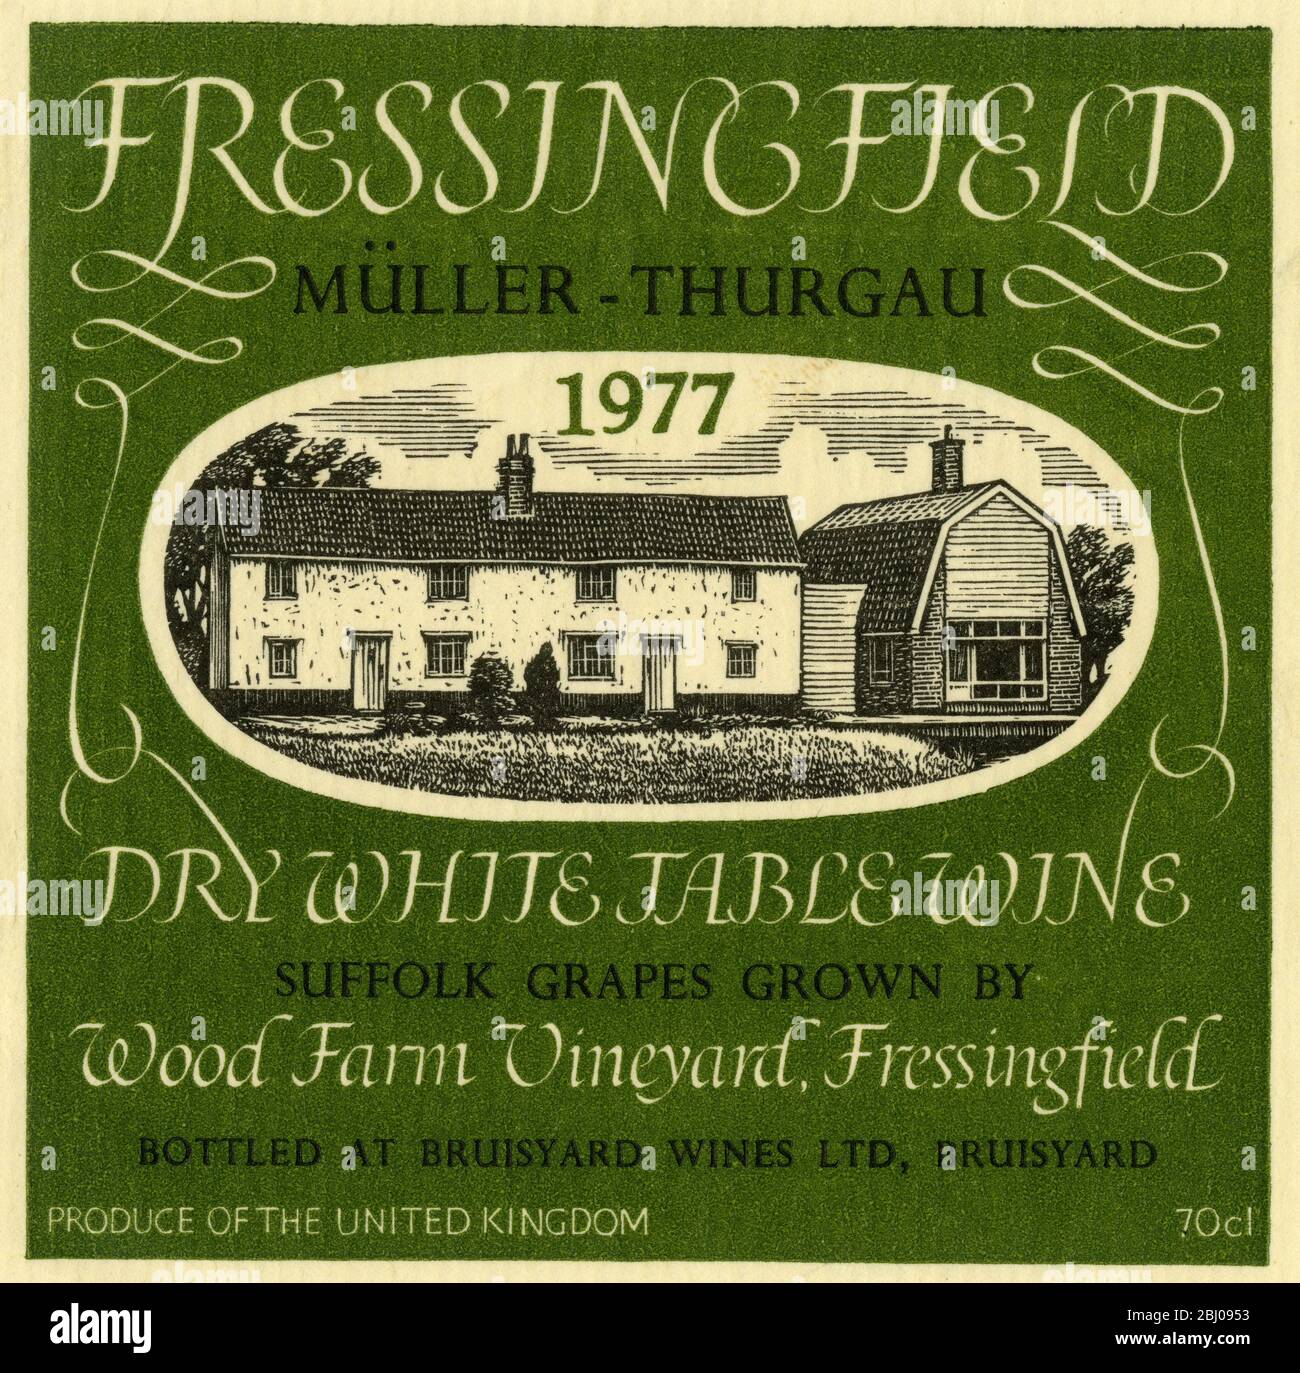 Wine Label. - Fressingfield. Muller-Thurgau. Dry White Table Wine. Suffolk Grapes Grown by Wood Farm Vineyard Fressingfield. Bottled at Bruisyard Wines Ltd, Bruisyard. - Produce of the UK. Stock Photo